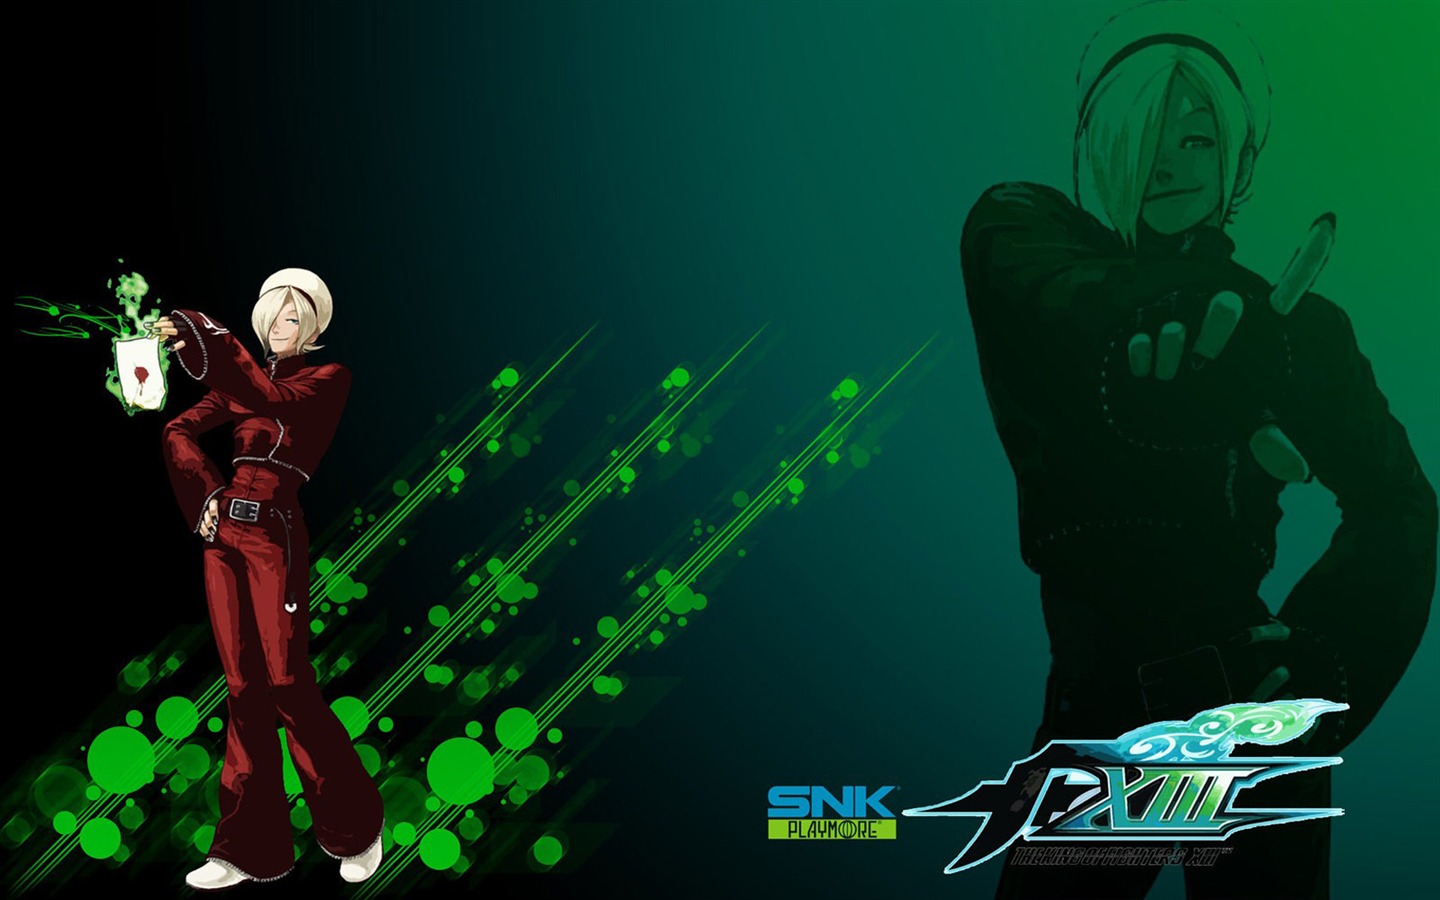 The King of Fighters XIII wallpapers #10 - 1440x900